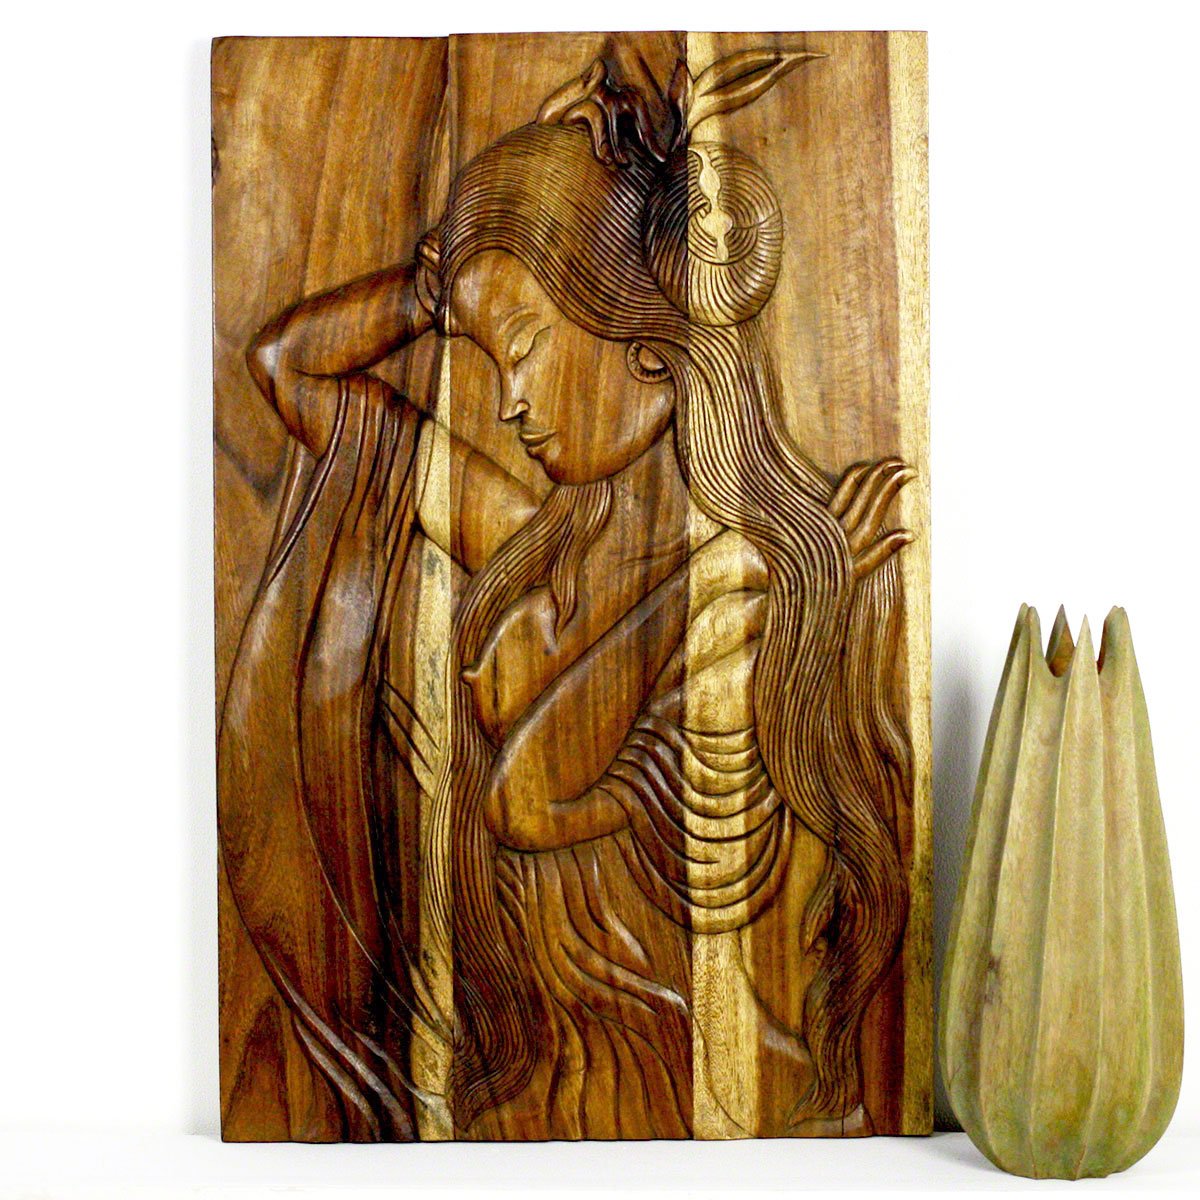 Haussmann® Wood Phuying (Woman) 24 x 36 in H Antique Oak